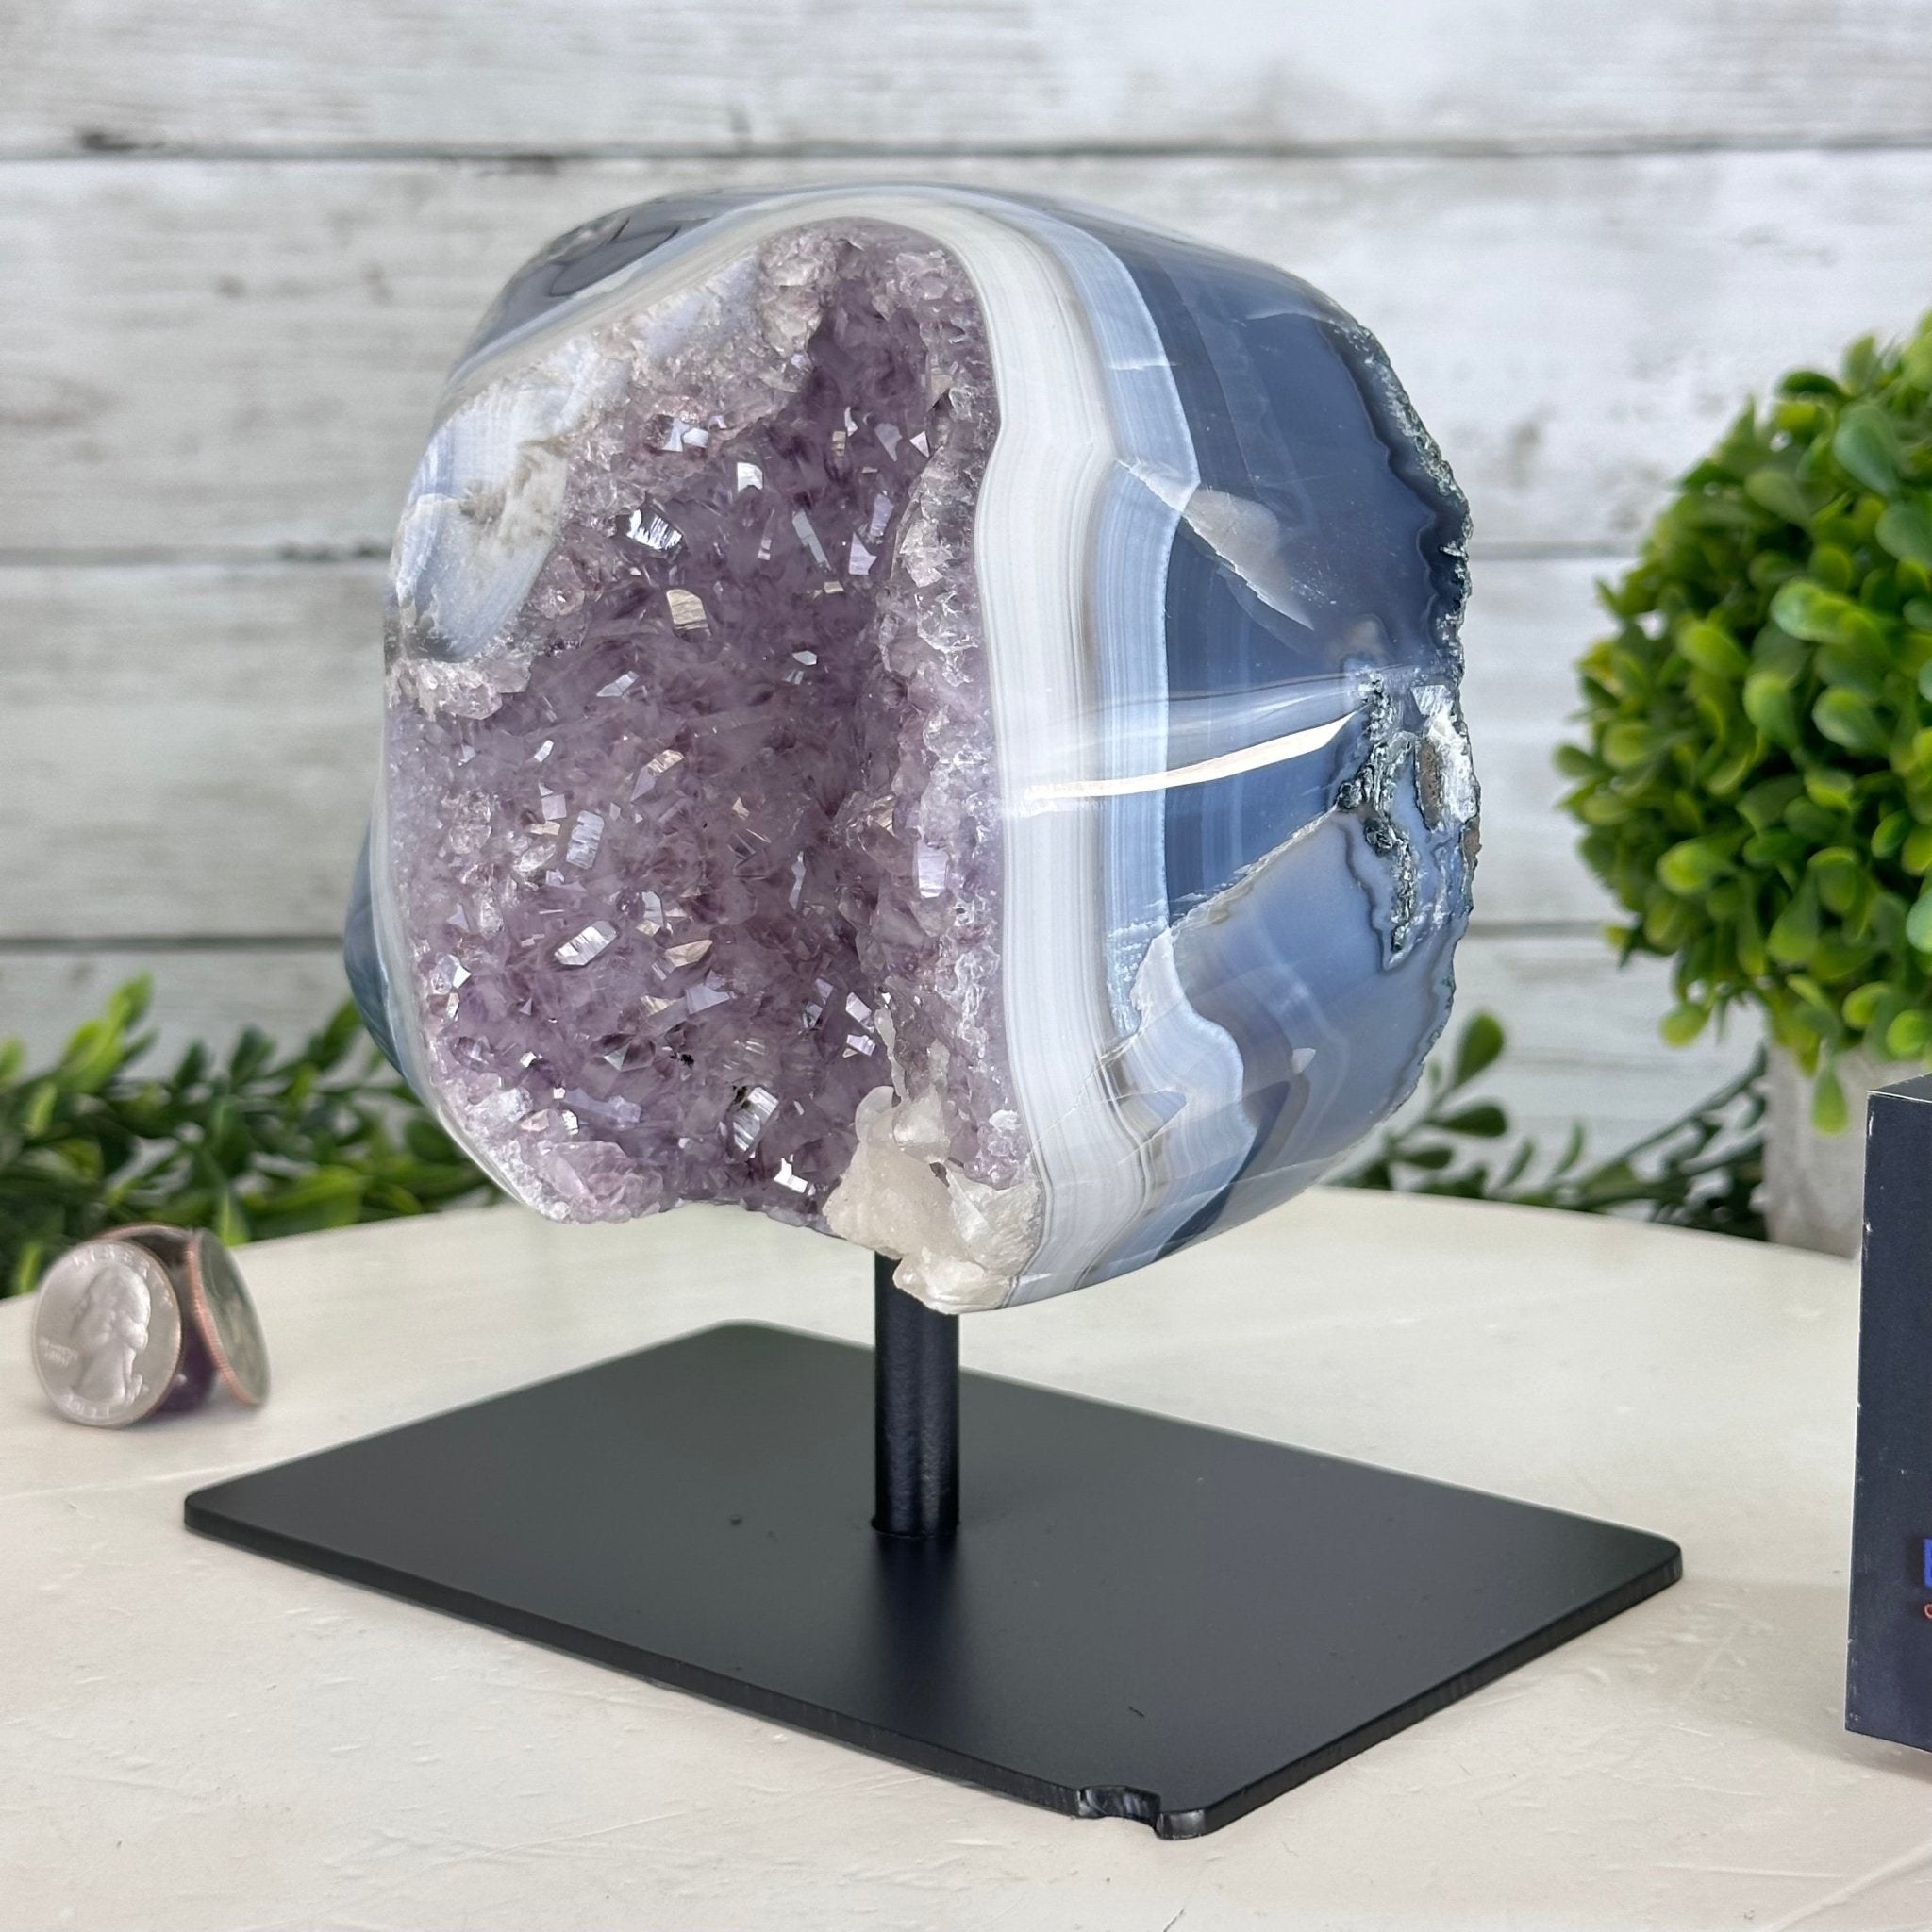 Amethyst Cluster on a Metal Base, 4.3 lbs & 6.1" Tall #5491-0174 - Brazil GemsBrazil GemsAmethyst Cluster on a Metal Base, 4.3 lbs & 6.1" Tall #5491-0174Clusters on Fixed Bases5491-0174